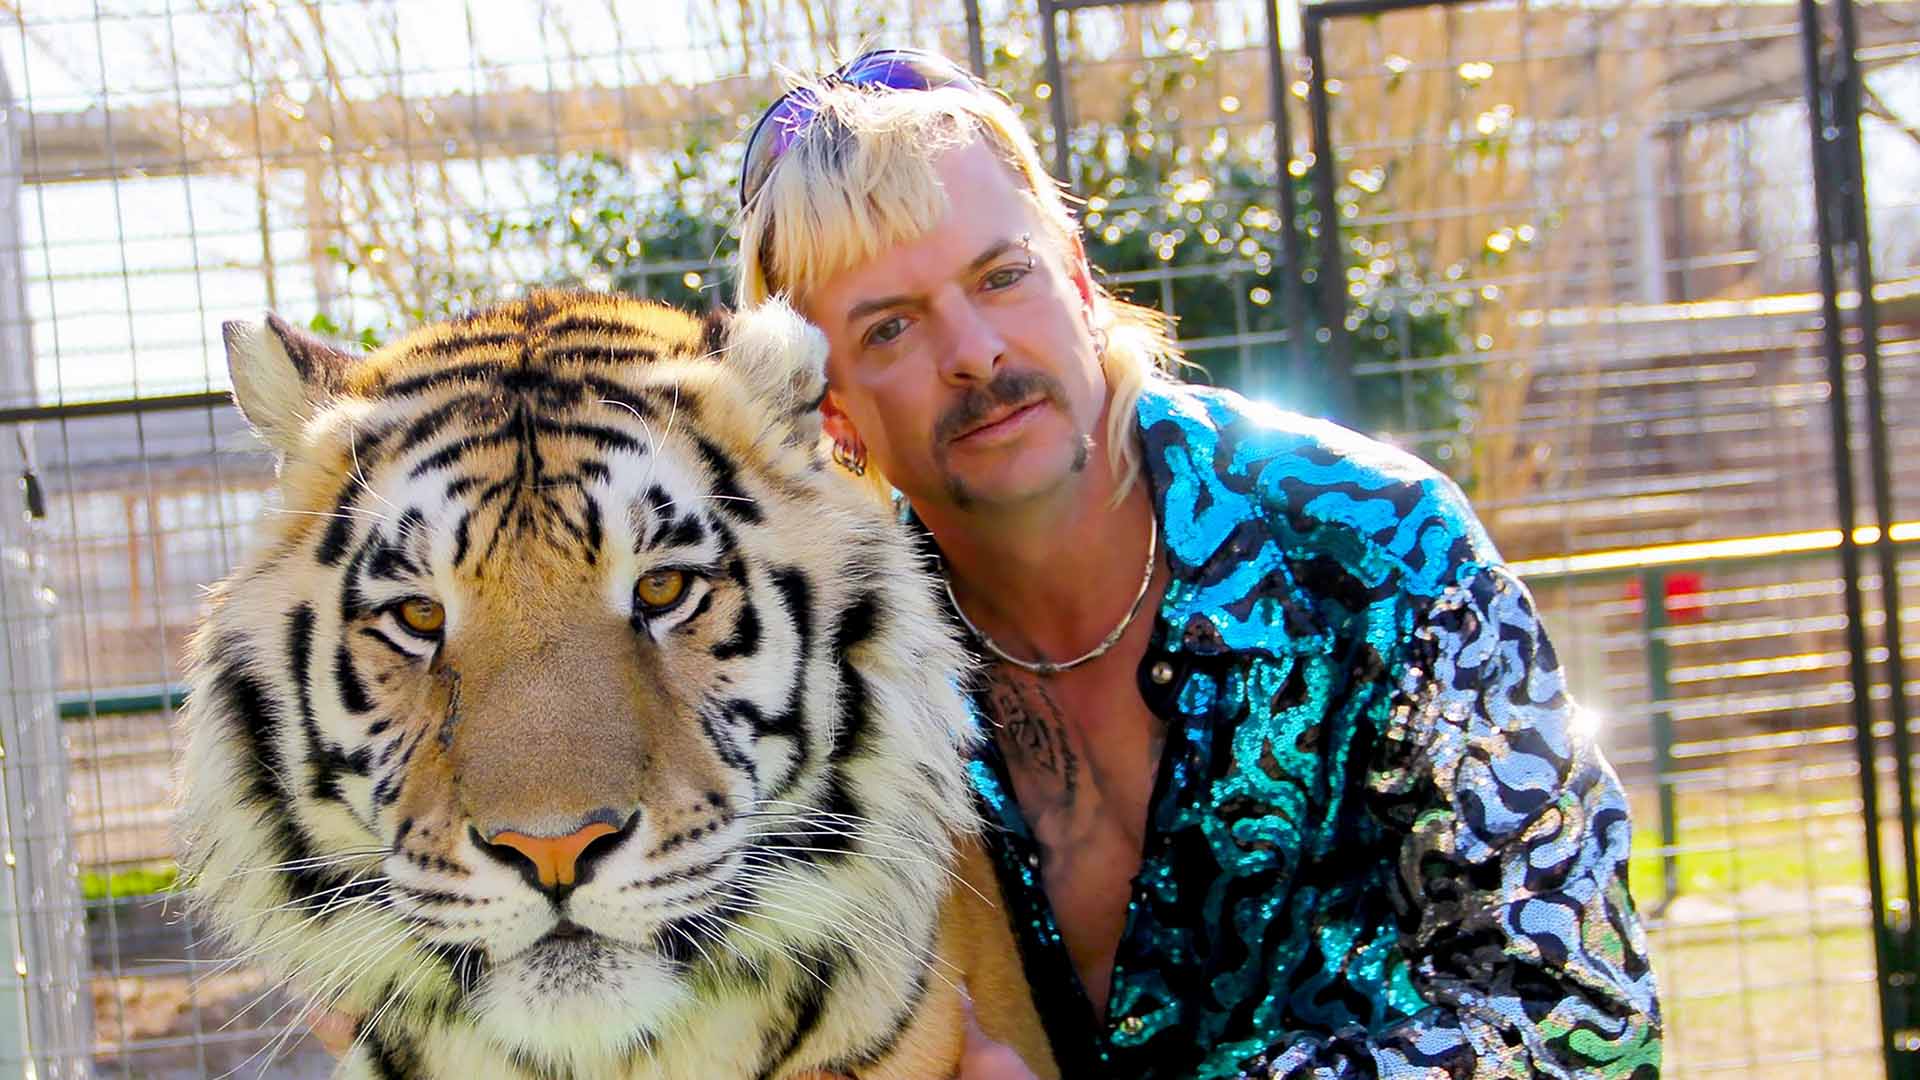 Nicolas Cage Is Set to Play Joe Exotic in a Dramatised Series About the 'Tiger King' Figure